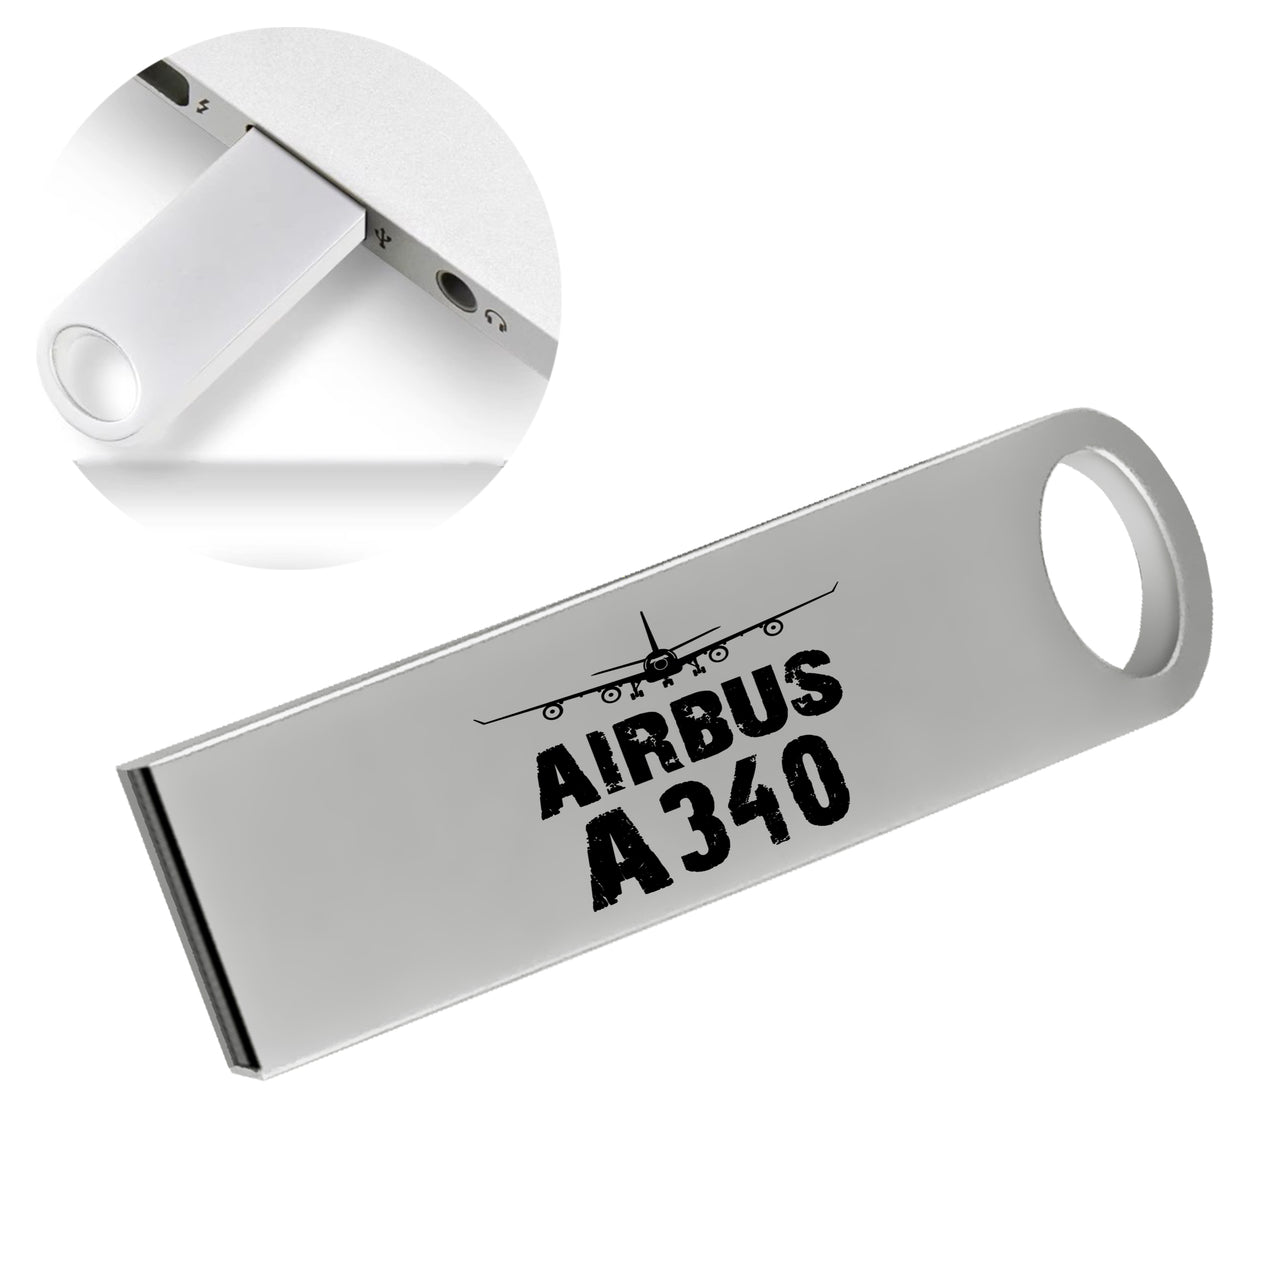 Airbus A340 & Plane Designed Waterproof USB Devices